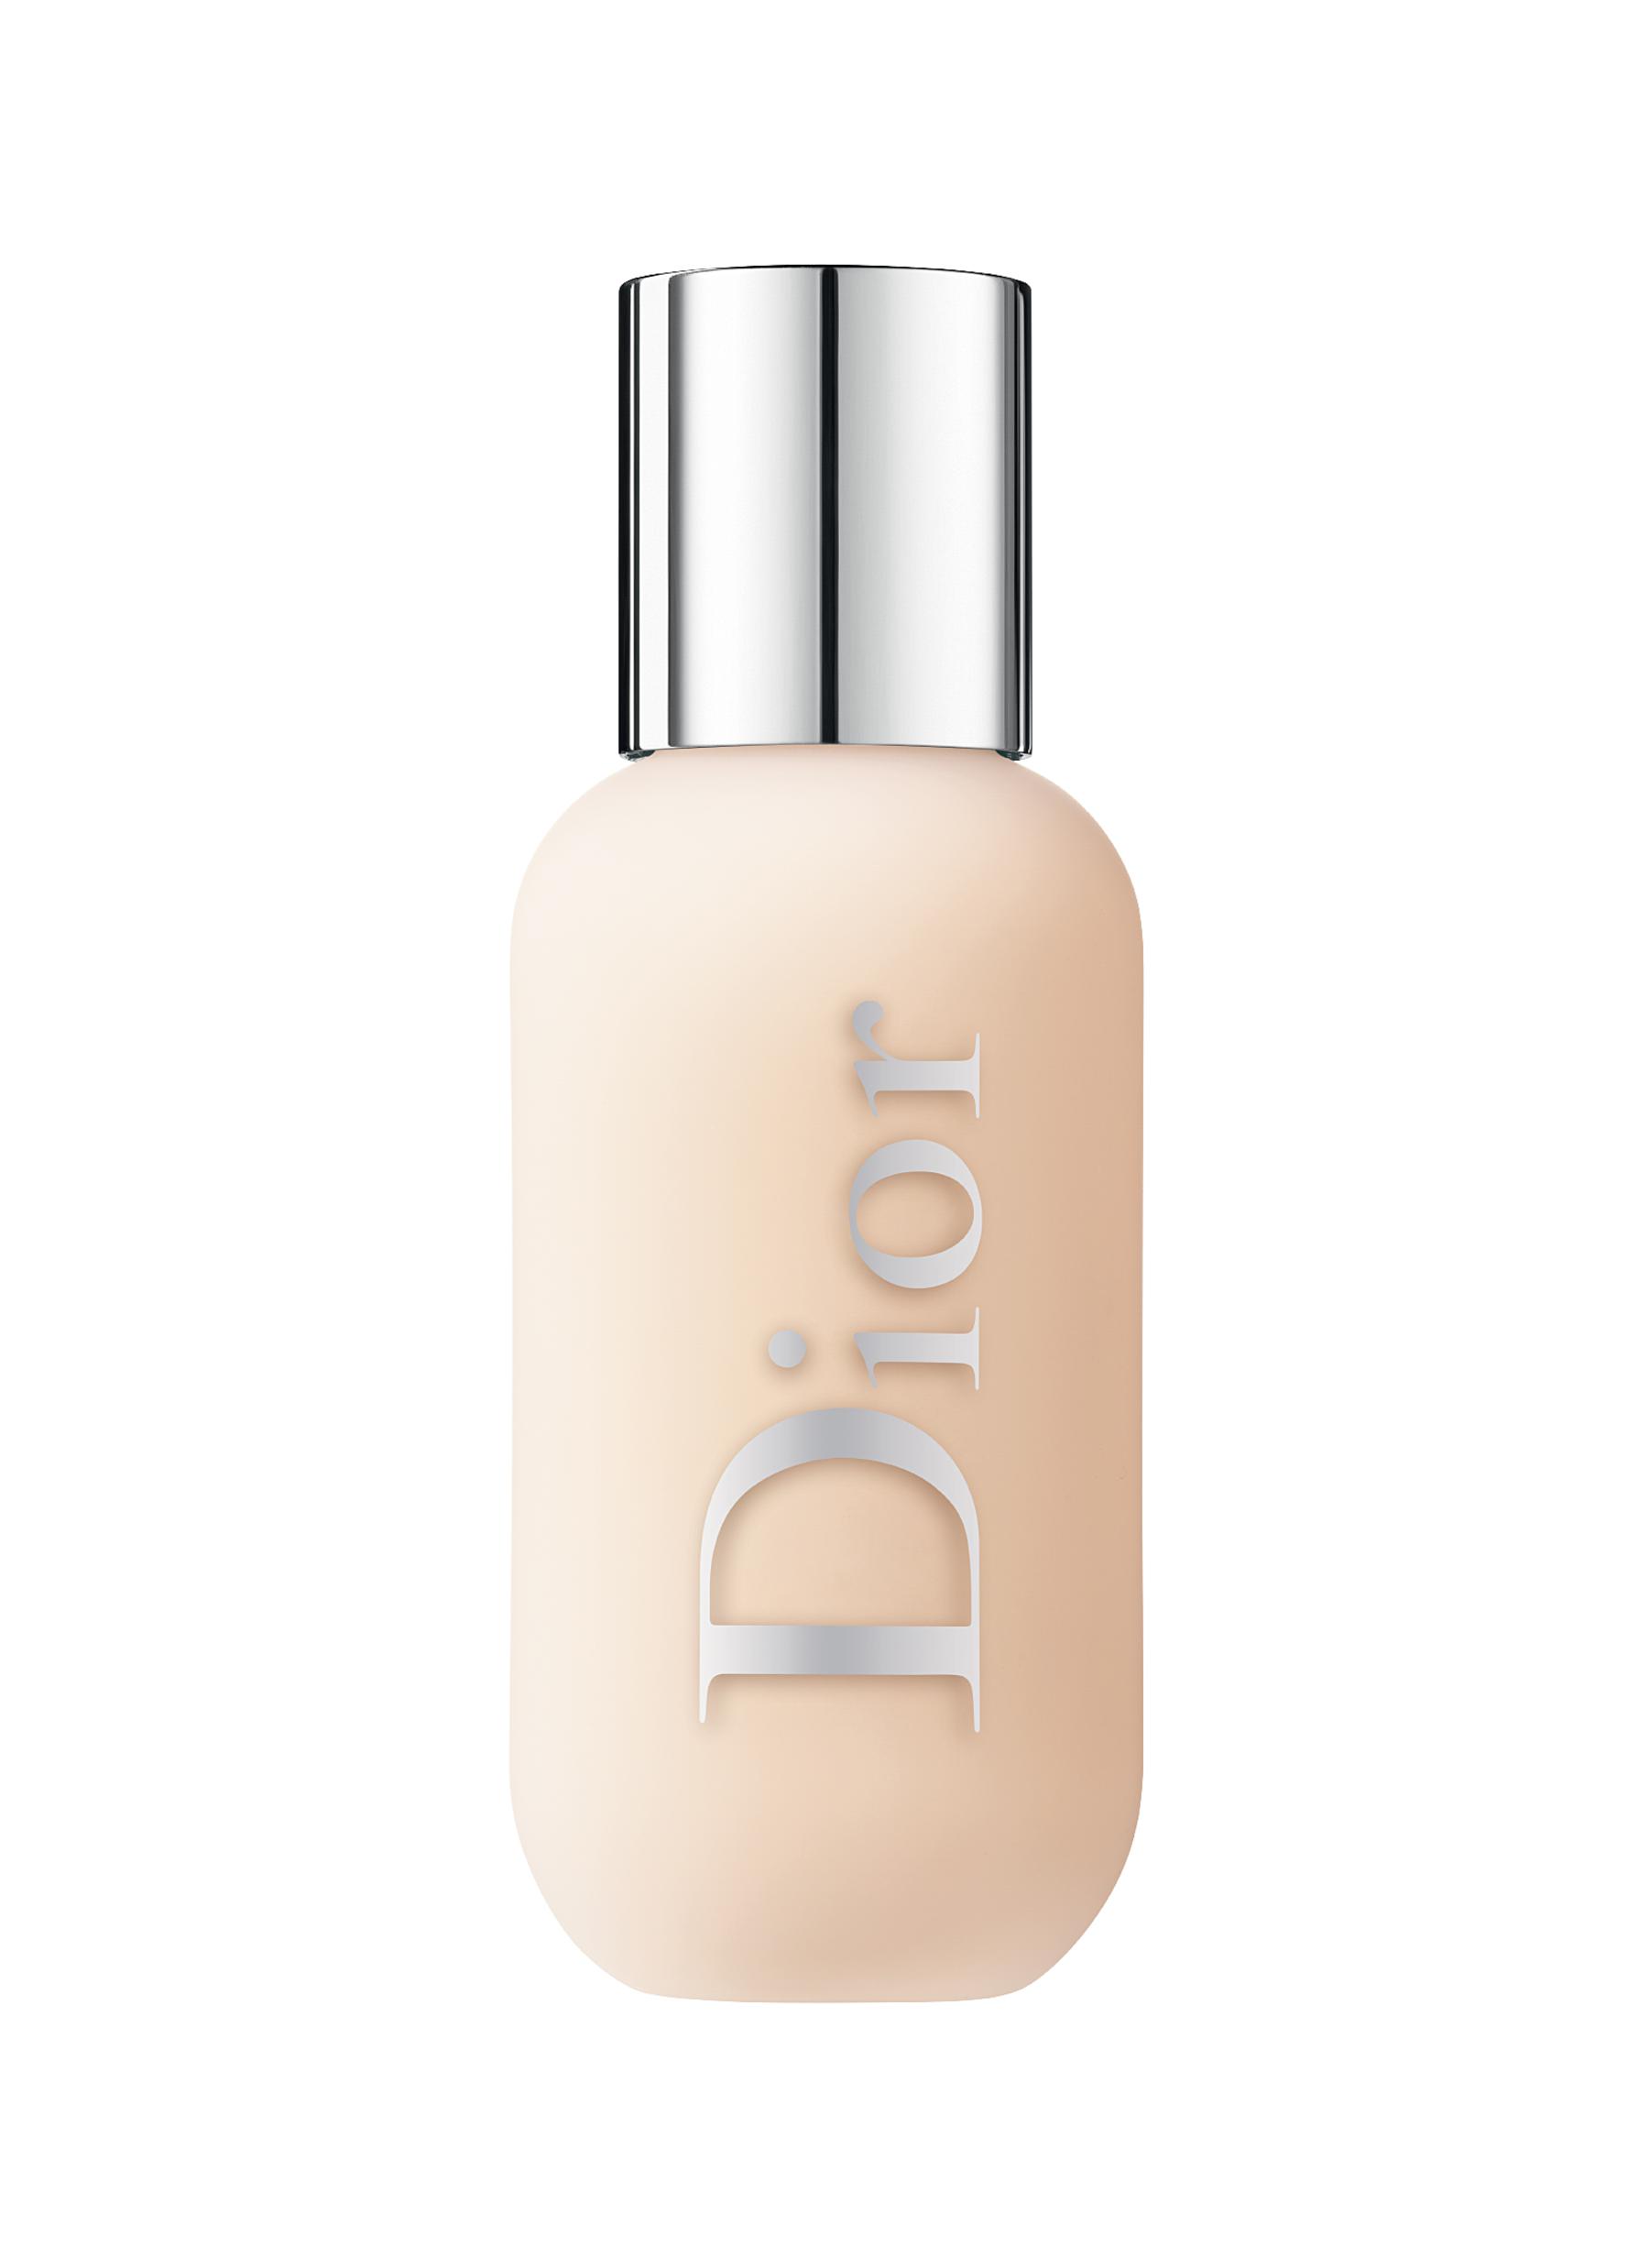 dior makeup face and body foundation